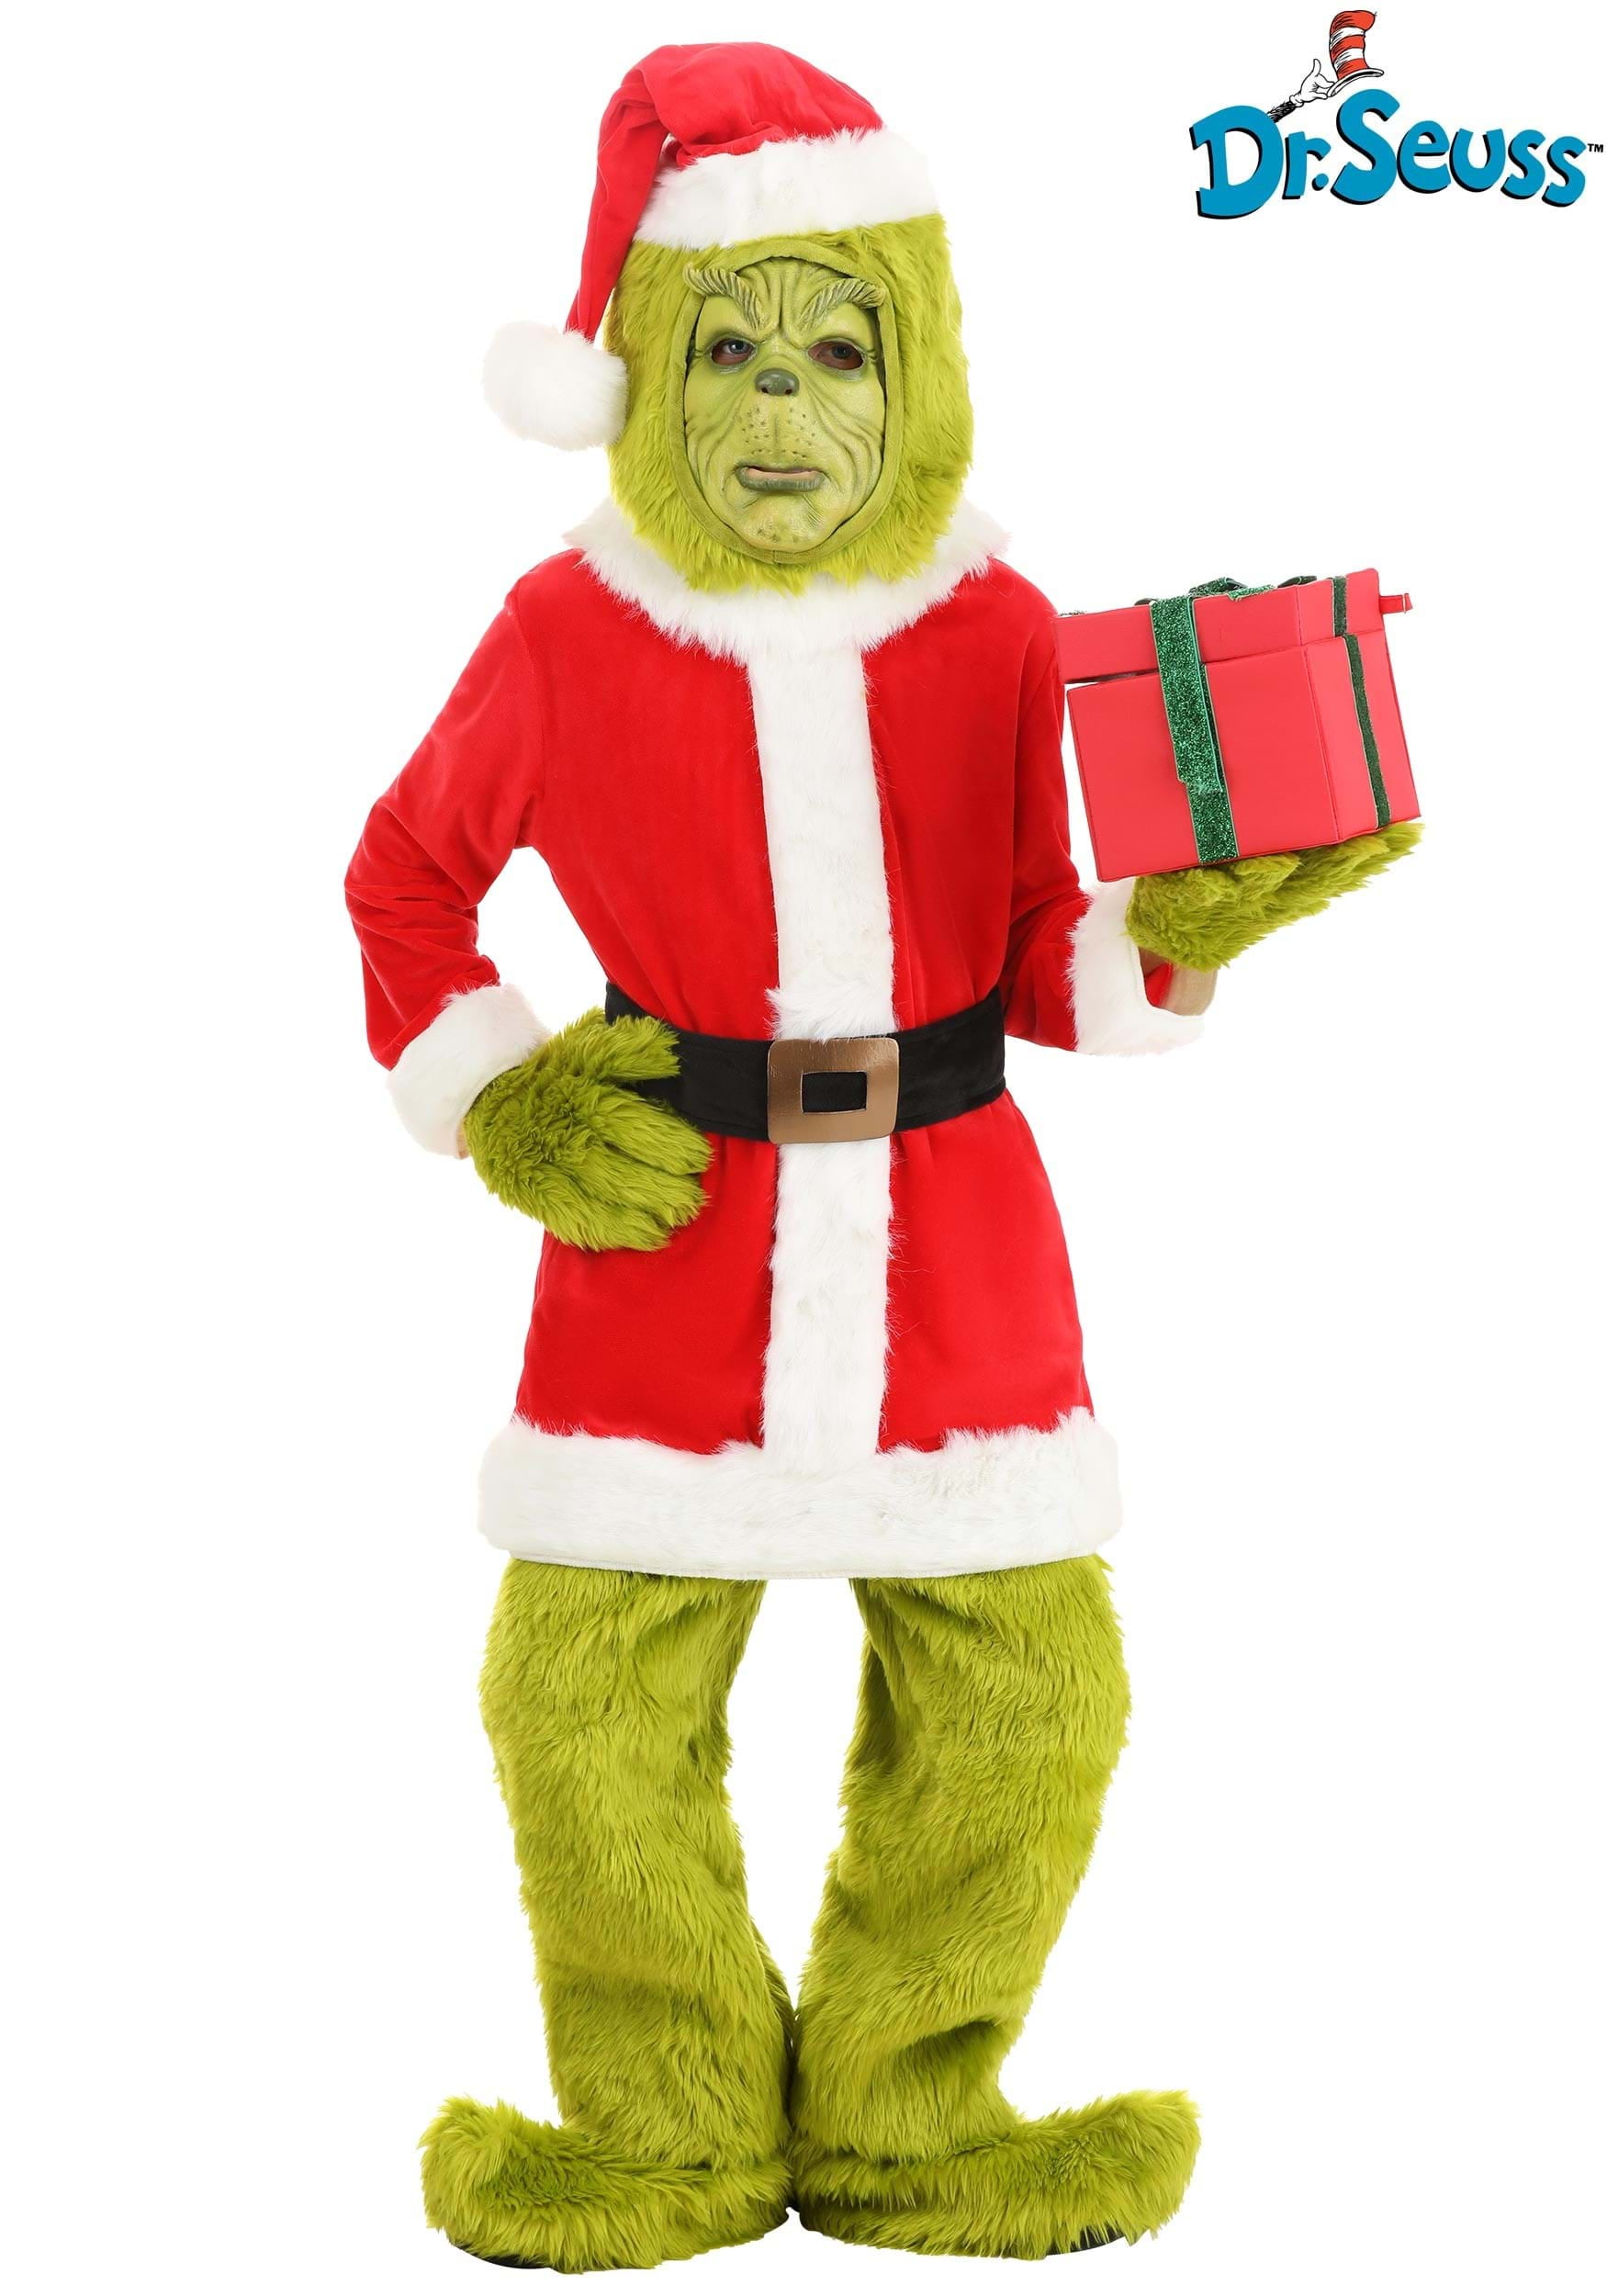 How the Grinch Stole Christmas Costume Accessories - Costume